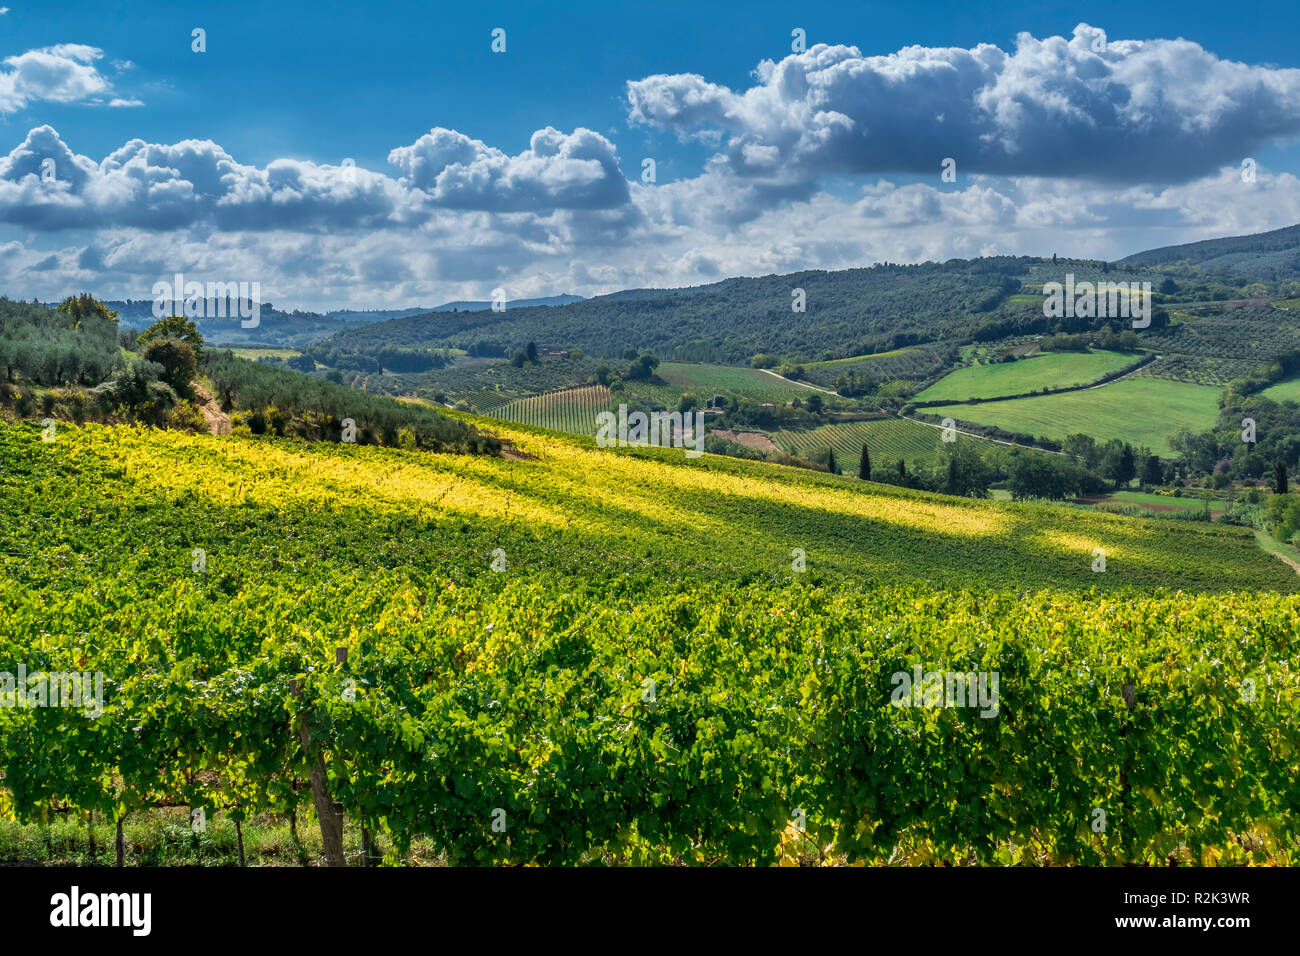 Landscape and Vineyards in Tuscany, Italy Stock Photo